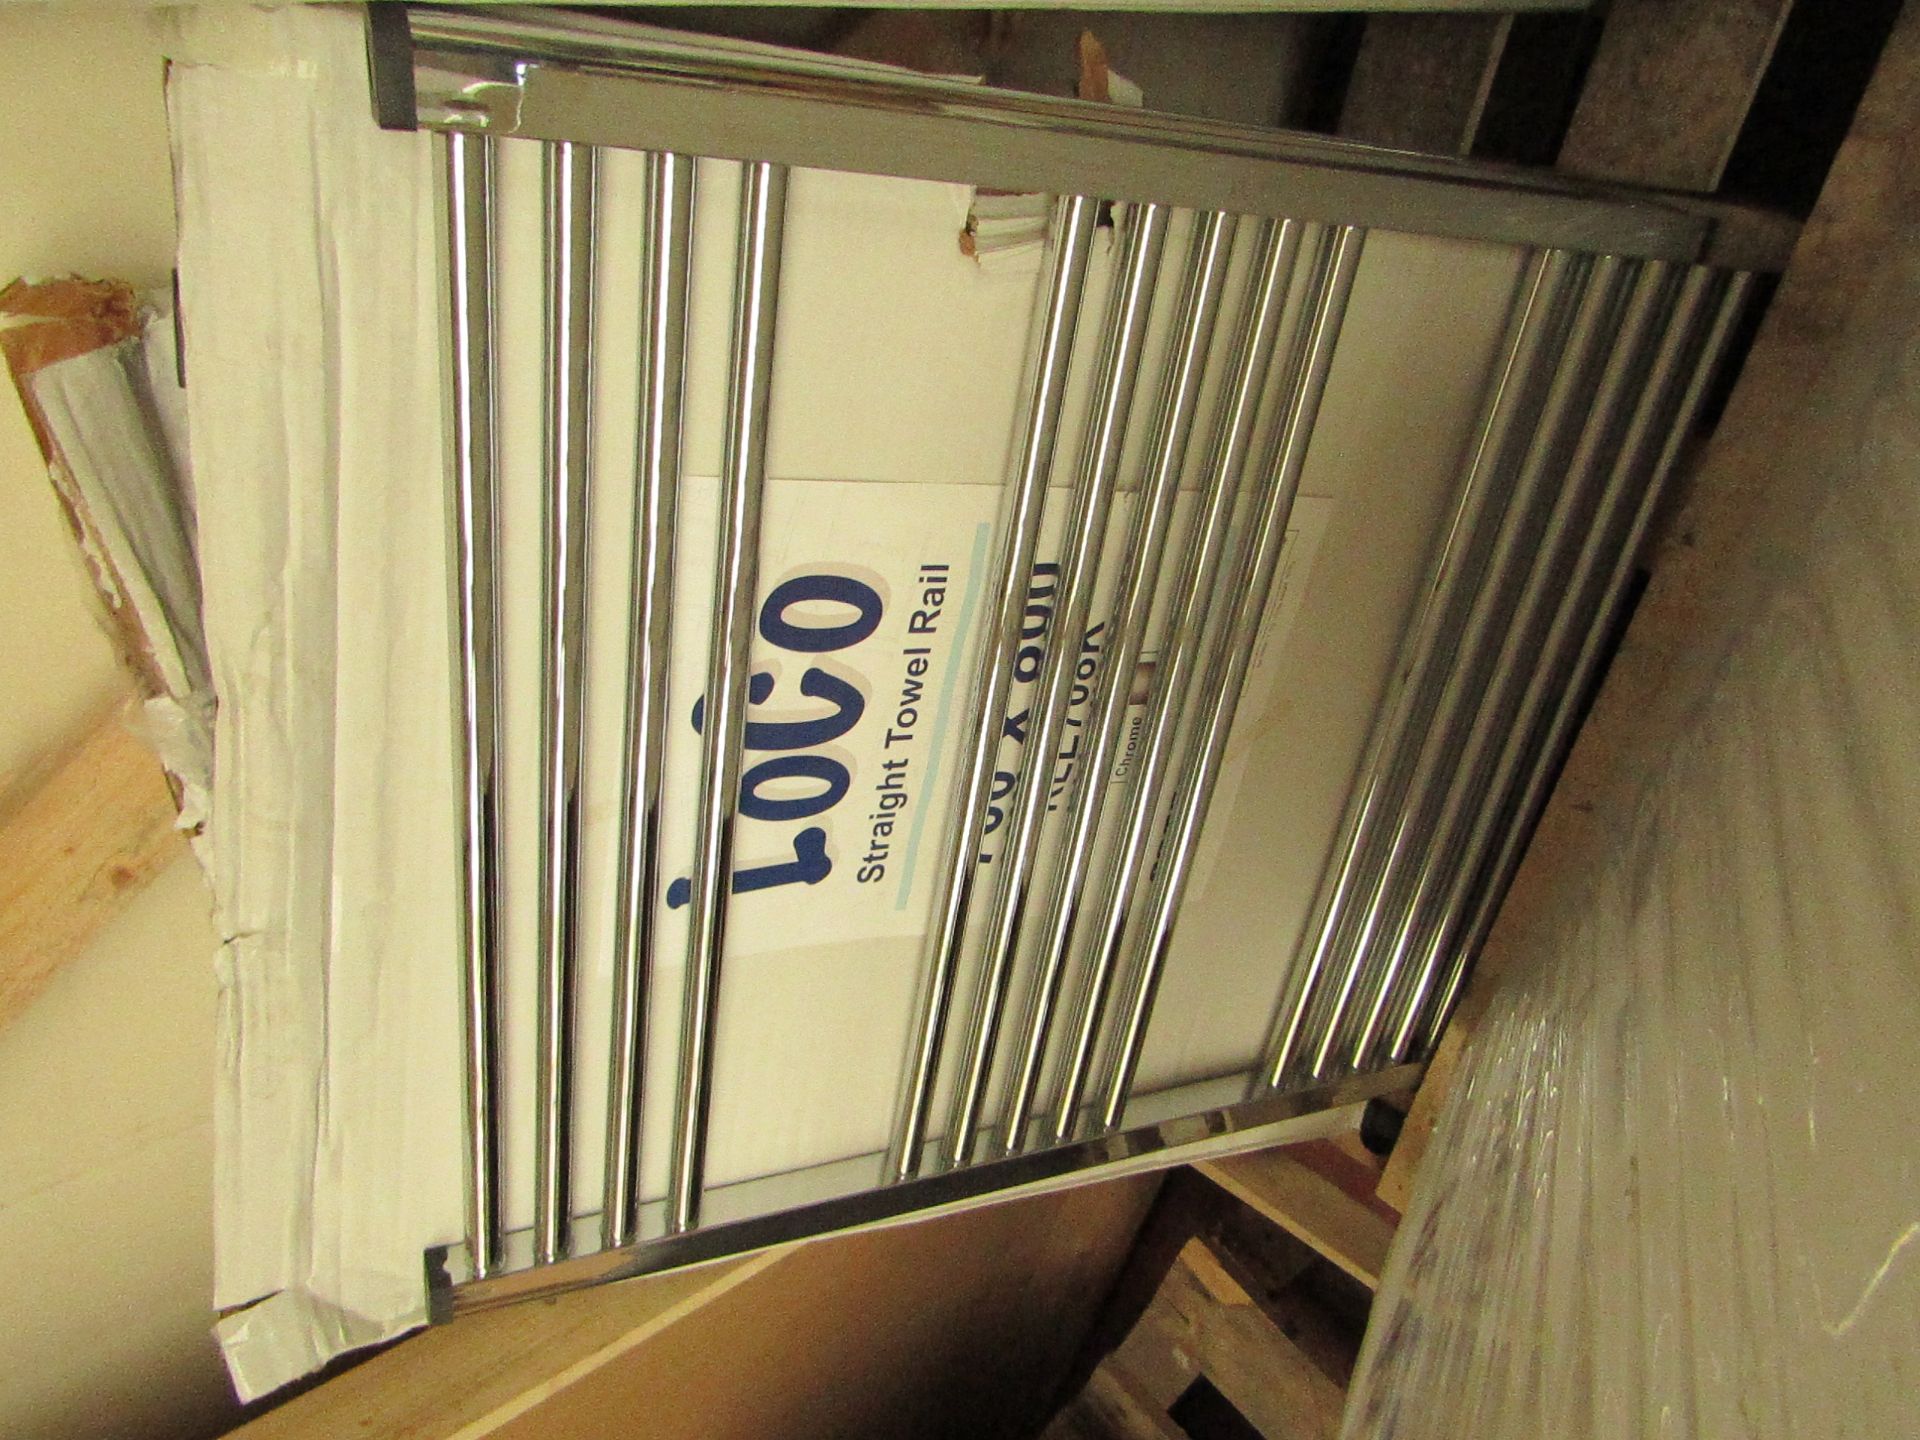 Loco straight towel rail 800 x 600, ex-display. Please note, this lot may contain marks, missing